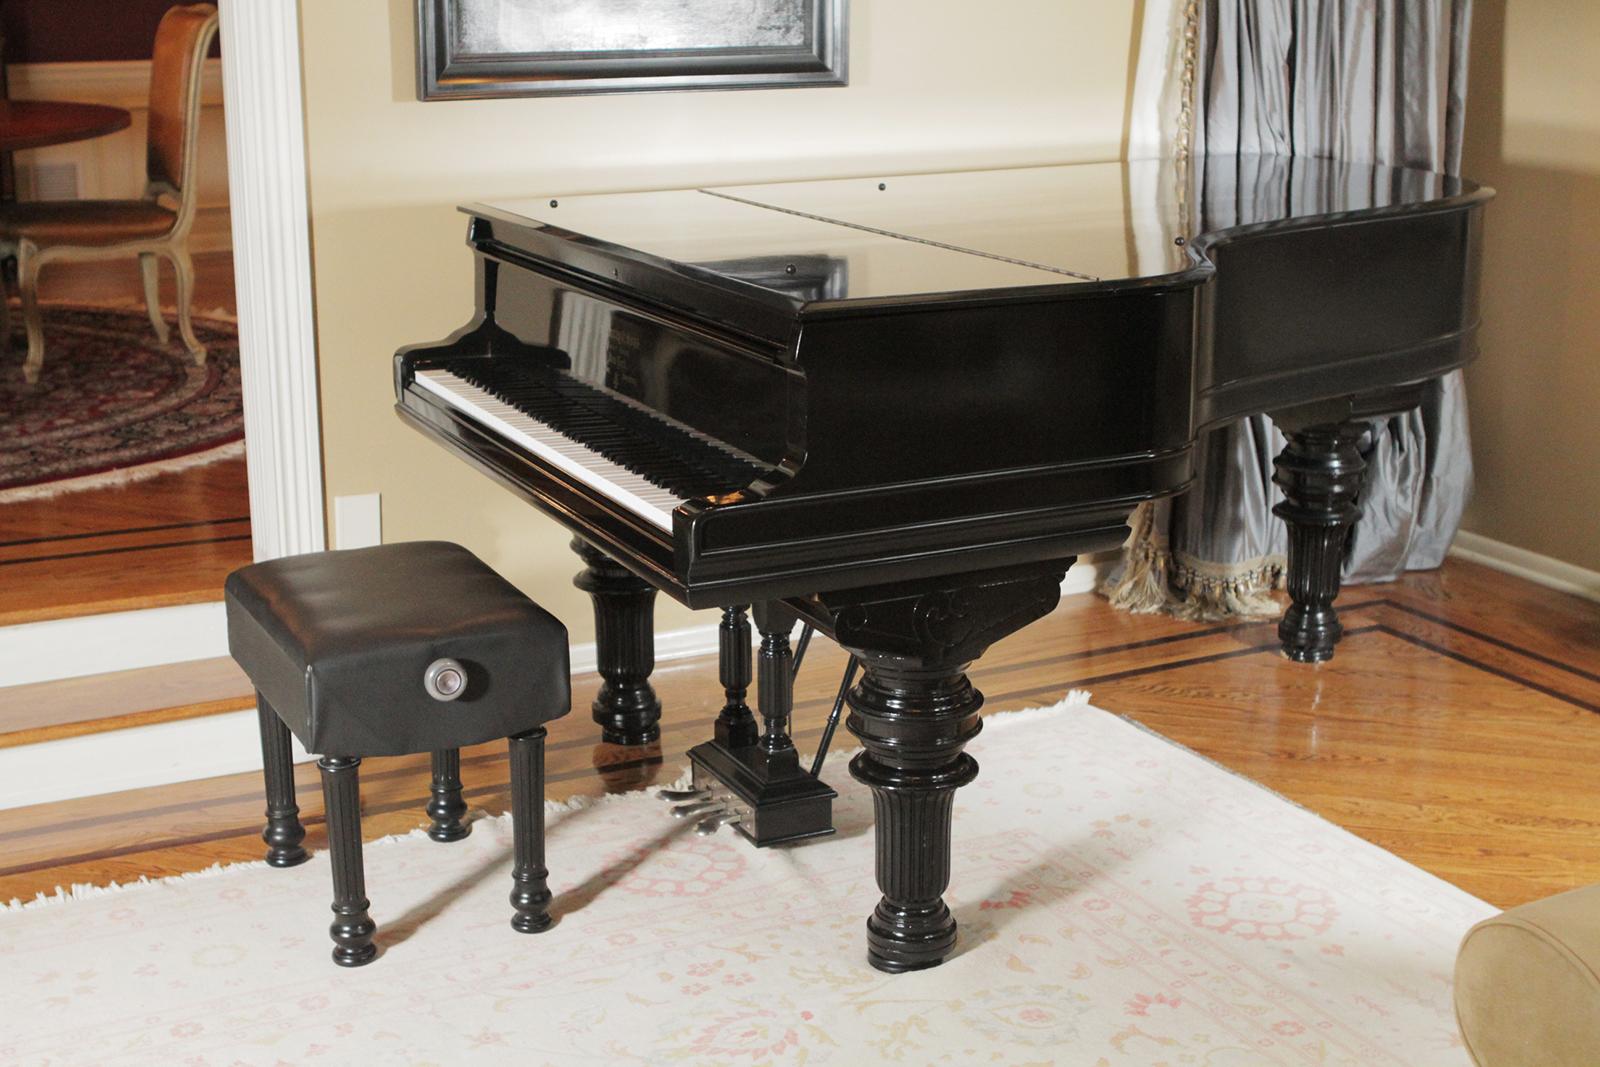 Fabulous Steinway Piano made in 1886 and fully restored. Elegant high polished ebony finish and has 85 keys, 88 keys was not introduced until 1893. Well cared for but may need a tuning upon shipment. This piano is stunning and from the premiere